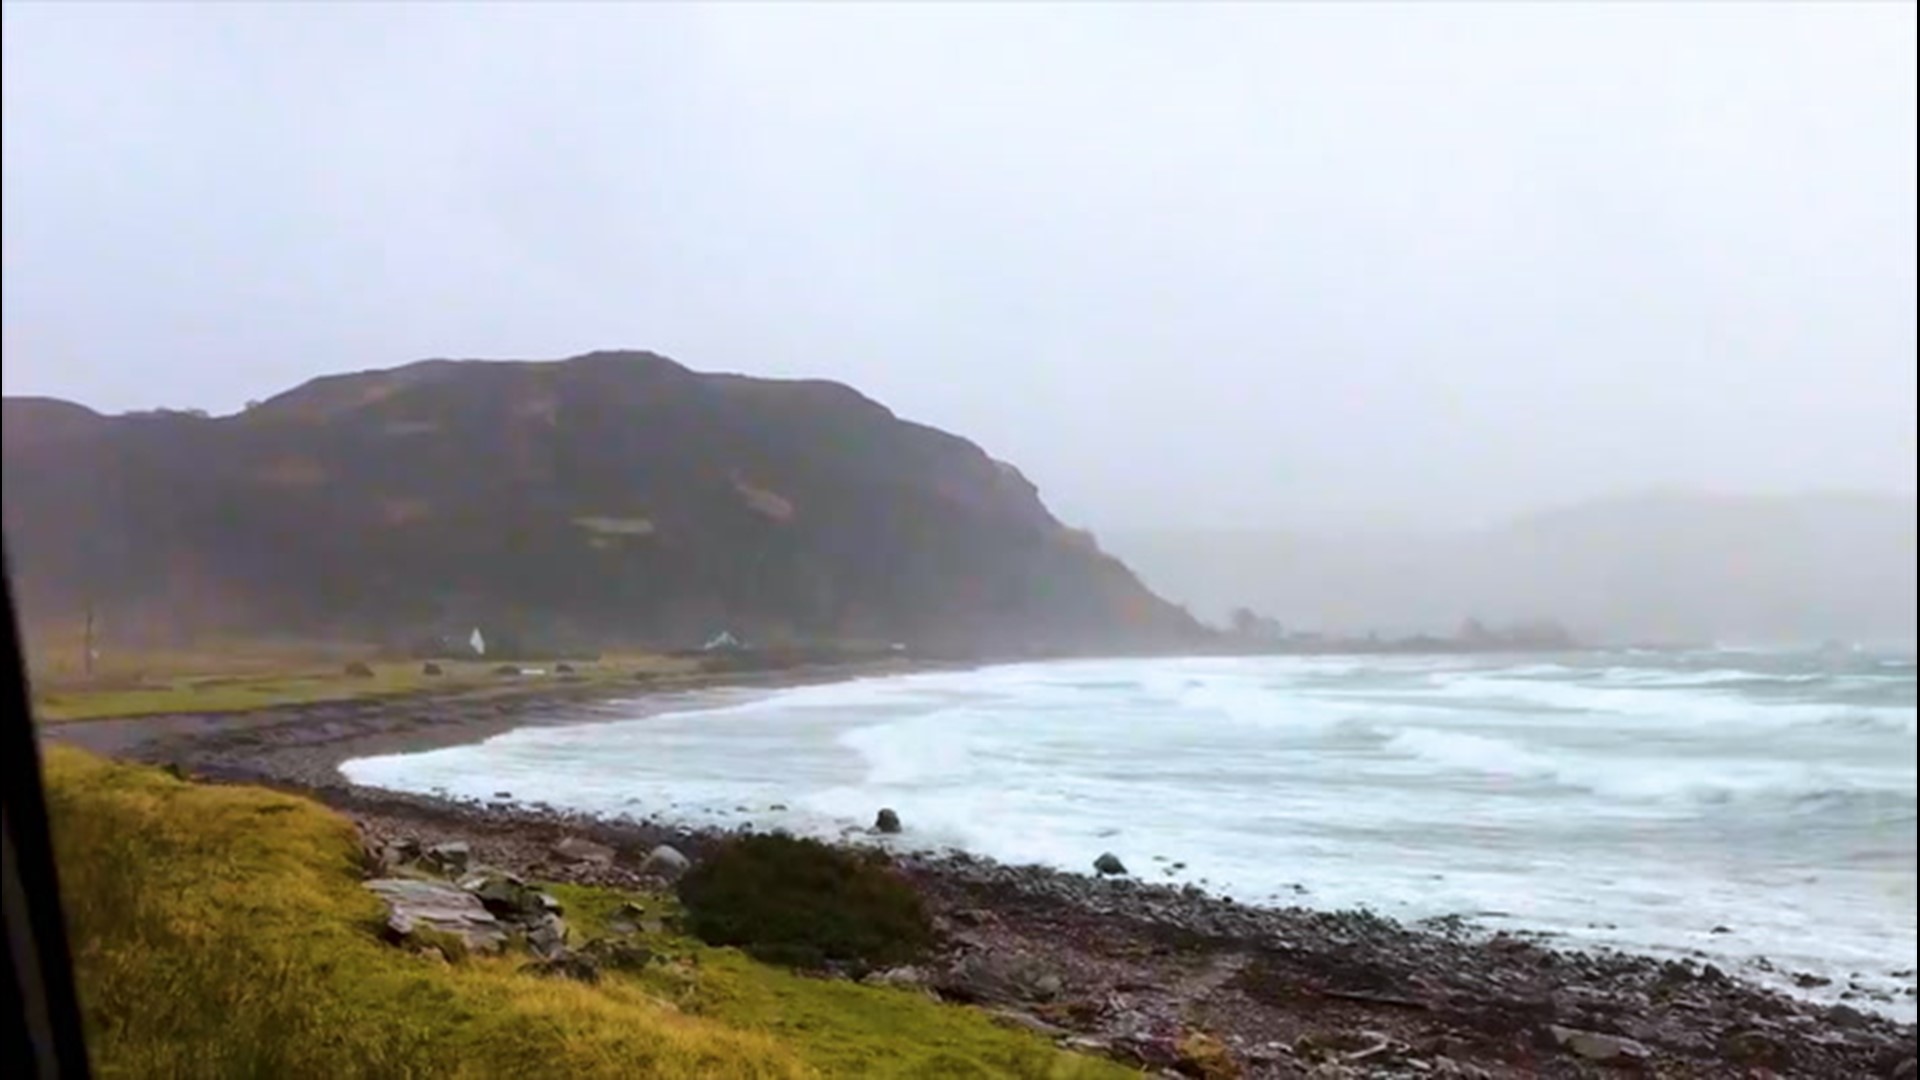 The Western Highlands, Scotland, was hit by Storm Dennis on Feb. 16, making for choppy waves and windy conditions.